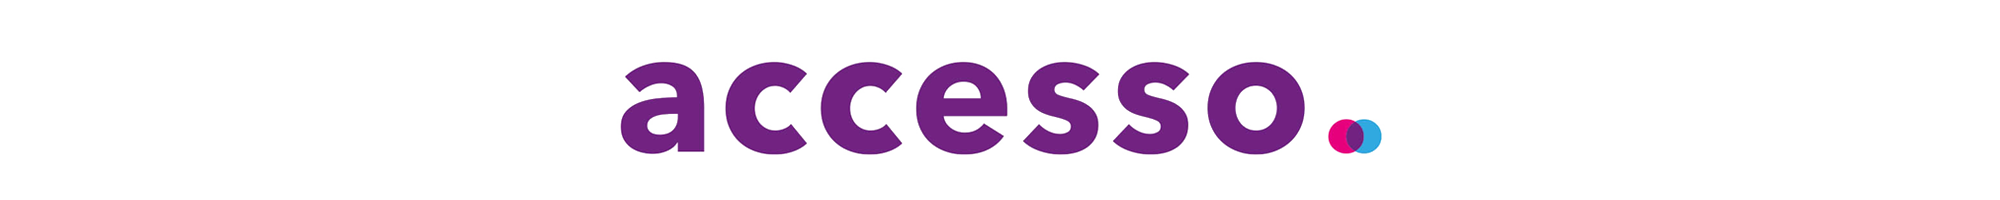 accesso-png